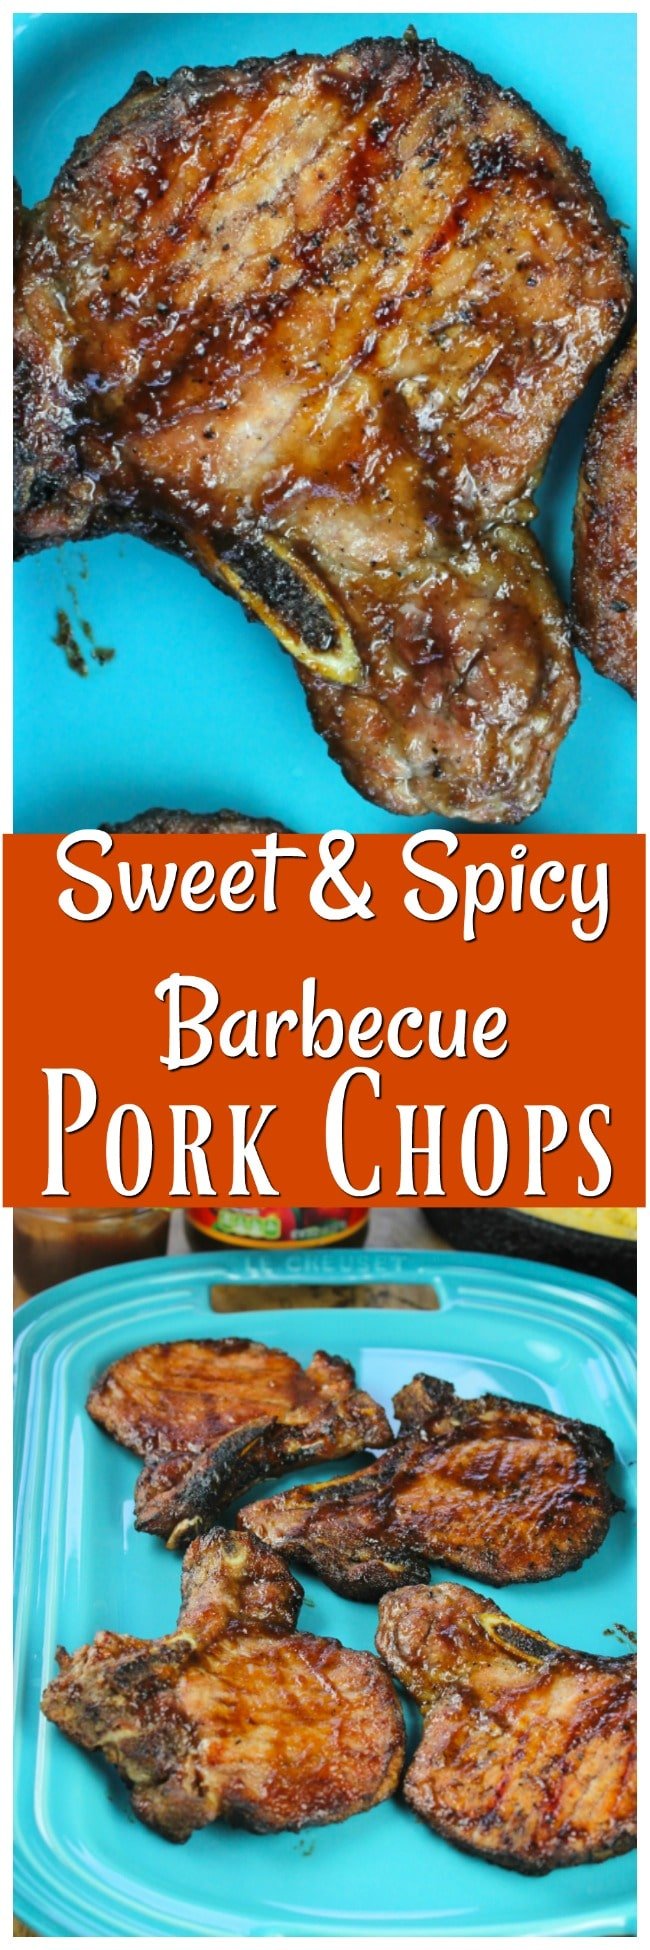 Sweet-and-Spicy-Barbecue-Pork-Chops